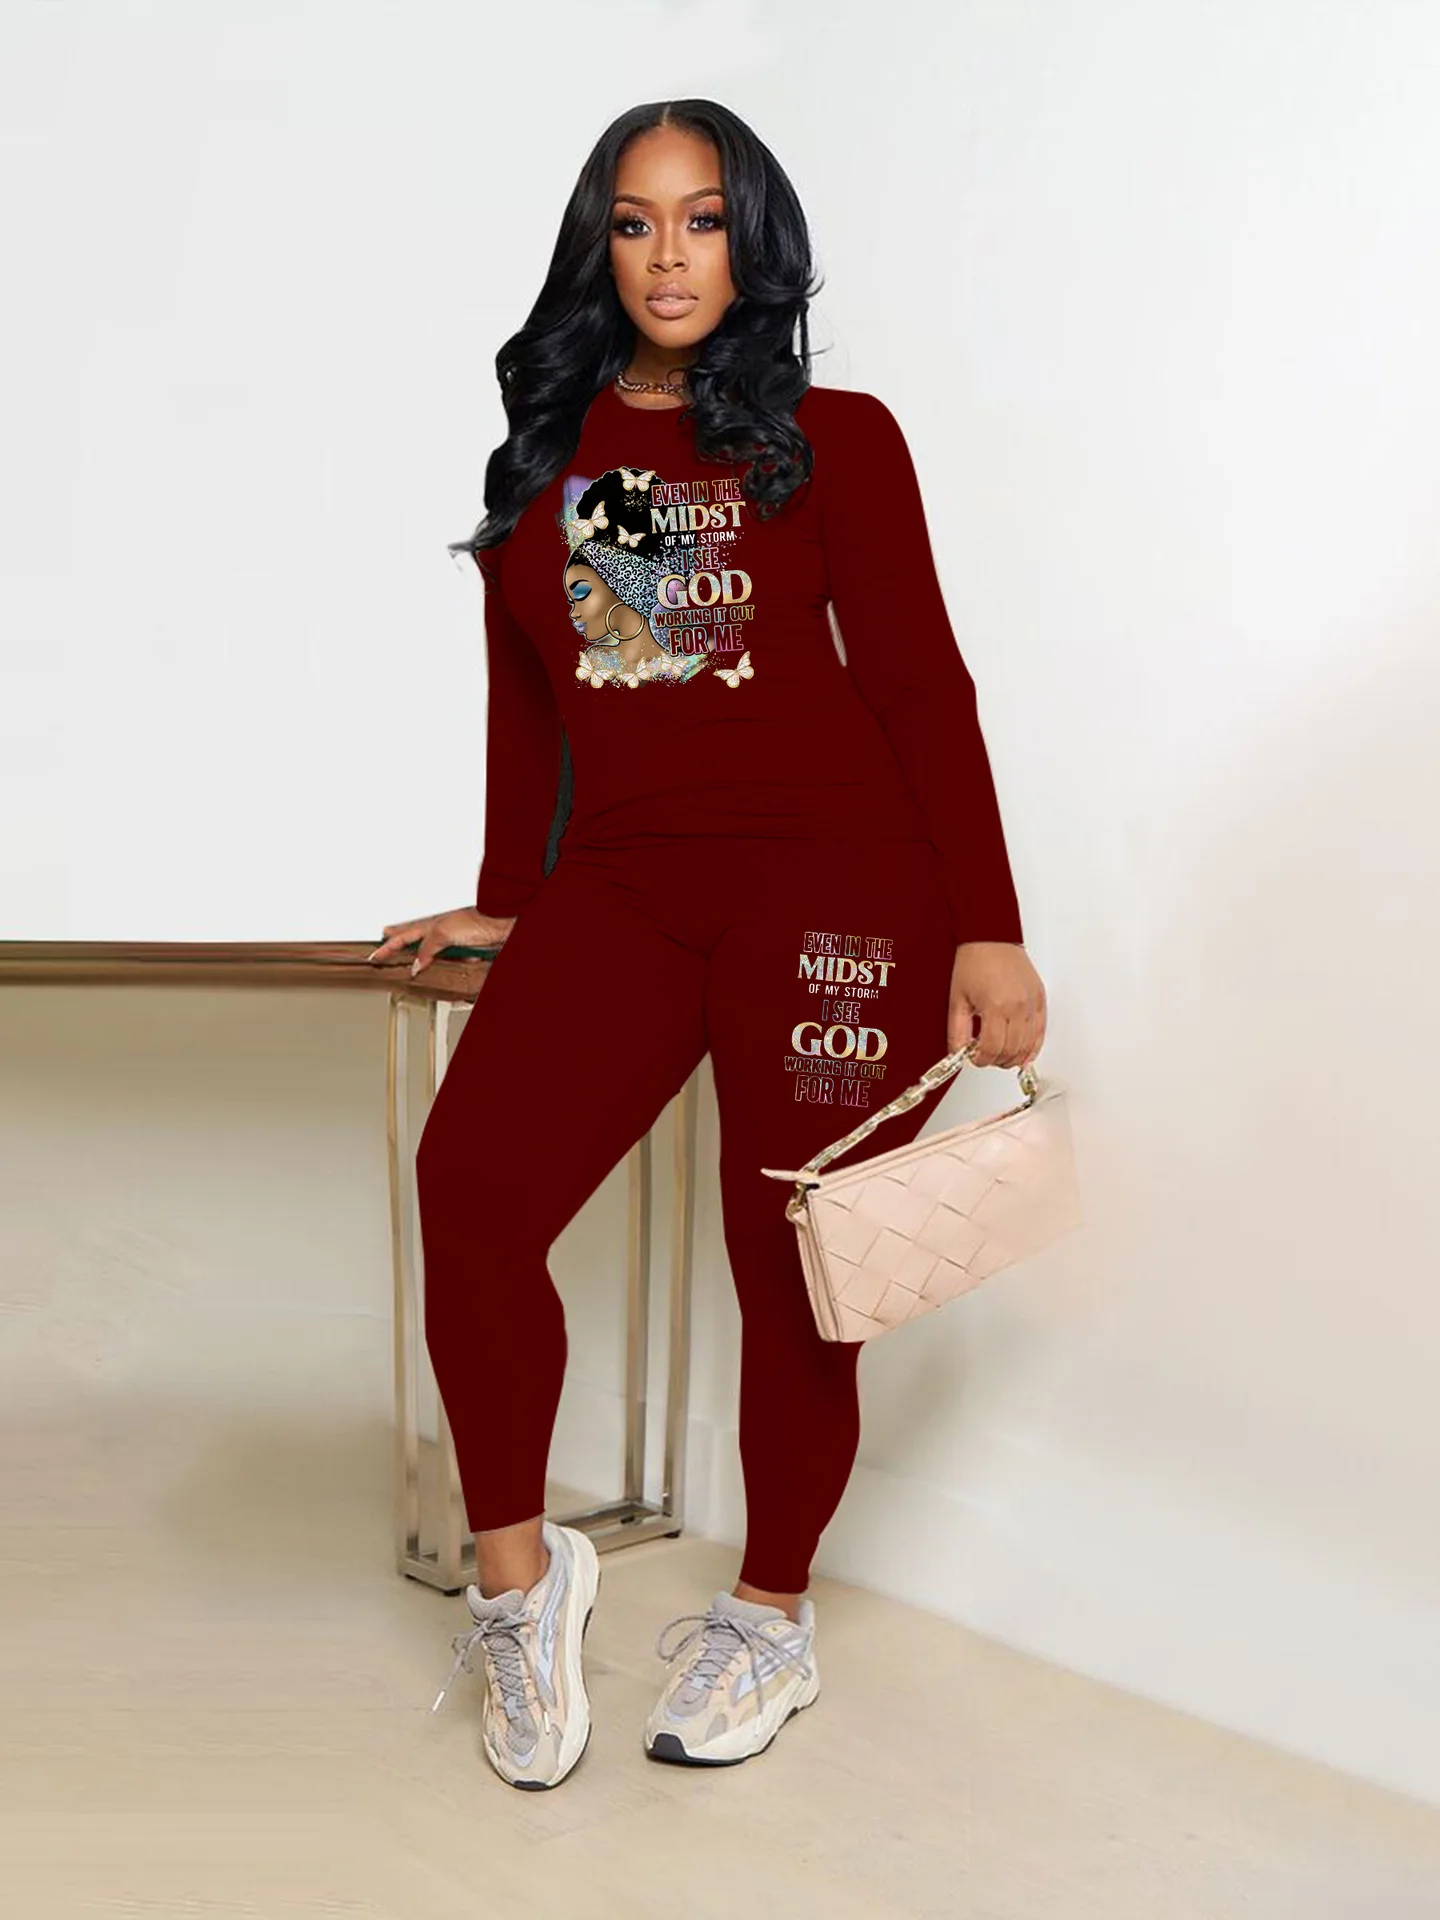 Women's Suit Autumn Fashion Athleisure Long Sleeve Top and Trousers Two Piece Set Printing O-Neck 2 Piece Sets Womens Outfits